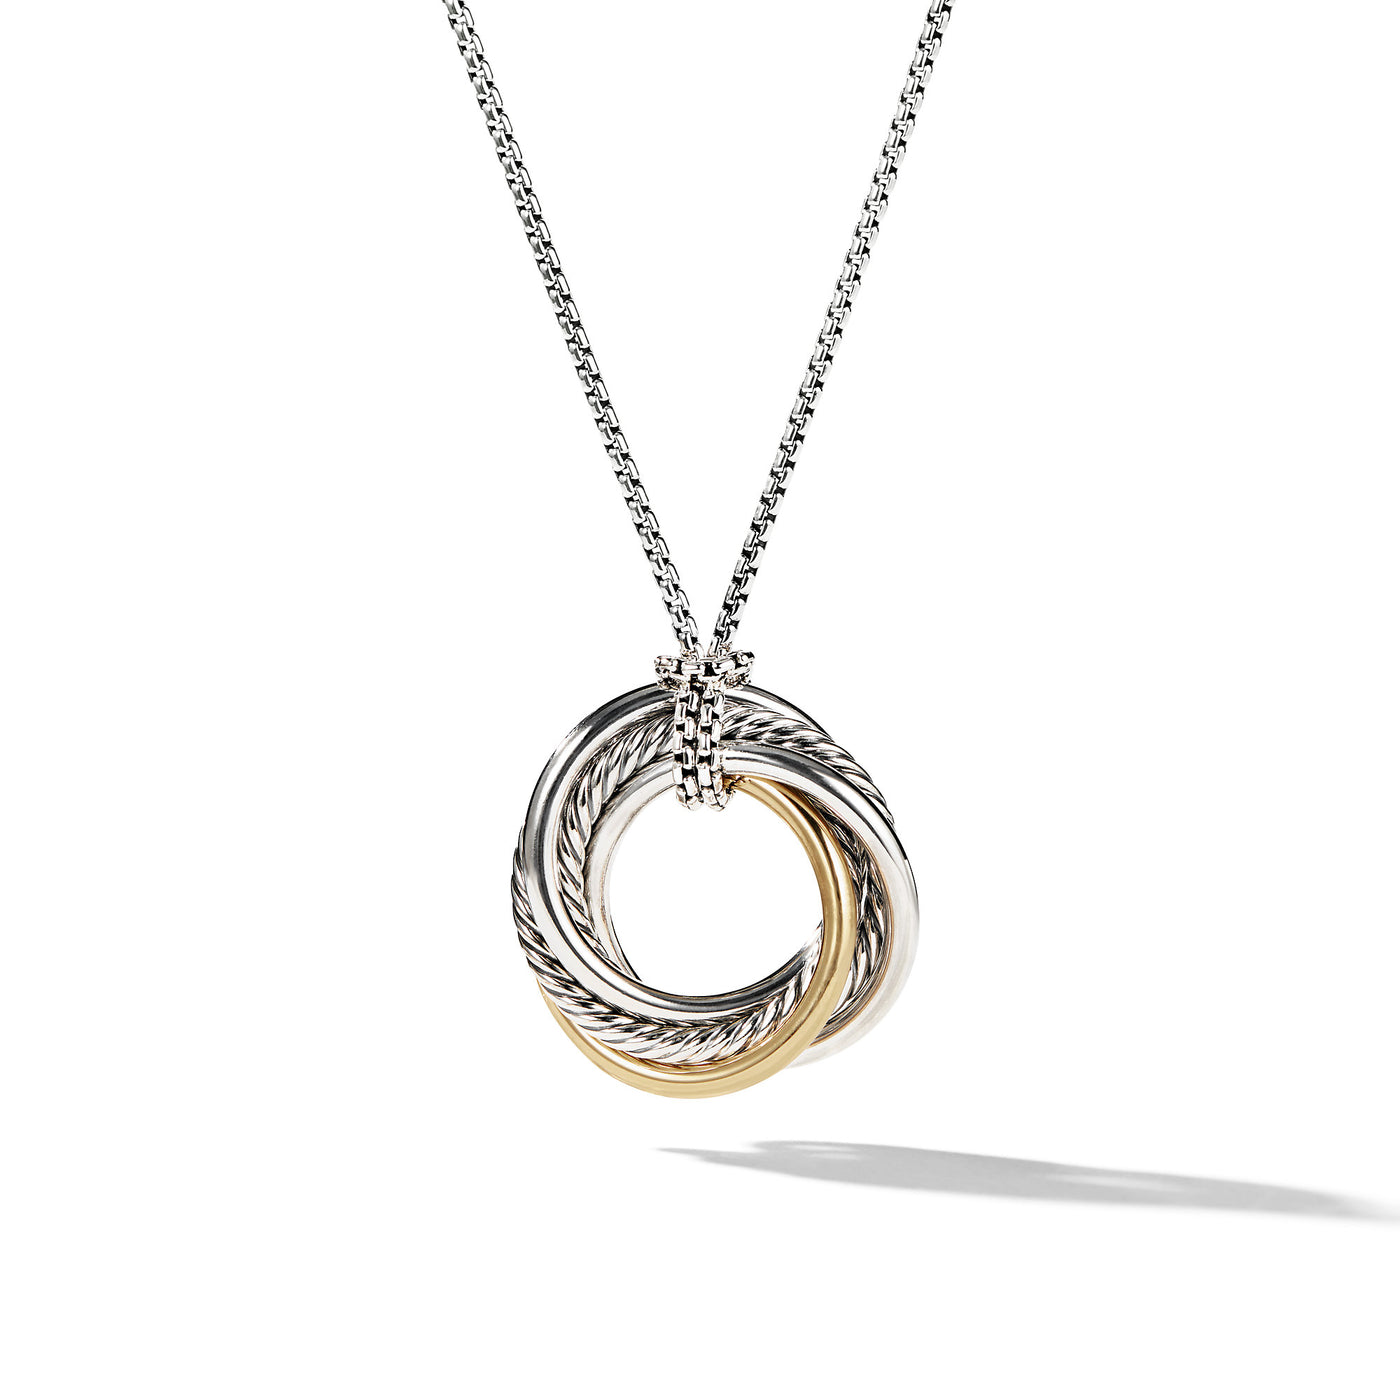 Crossover Pendant Necklace in Sterling Silver with 14K Yellow Gold\, 28mm